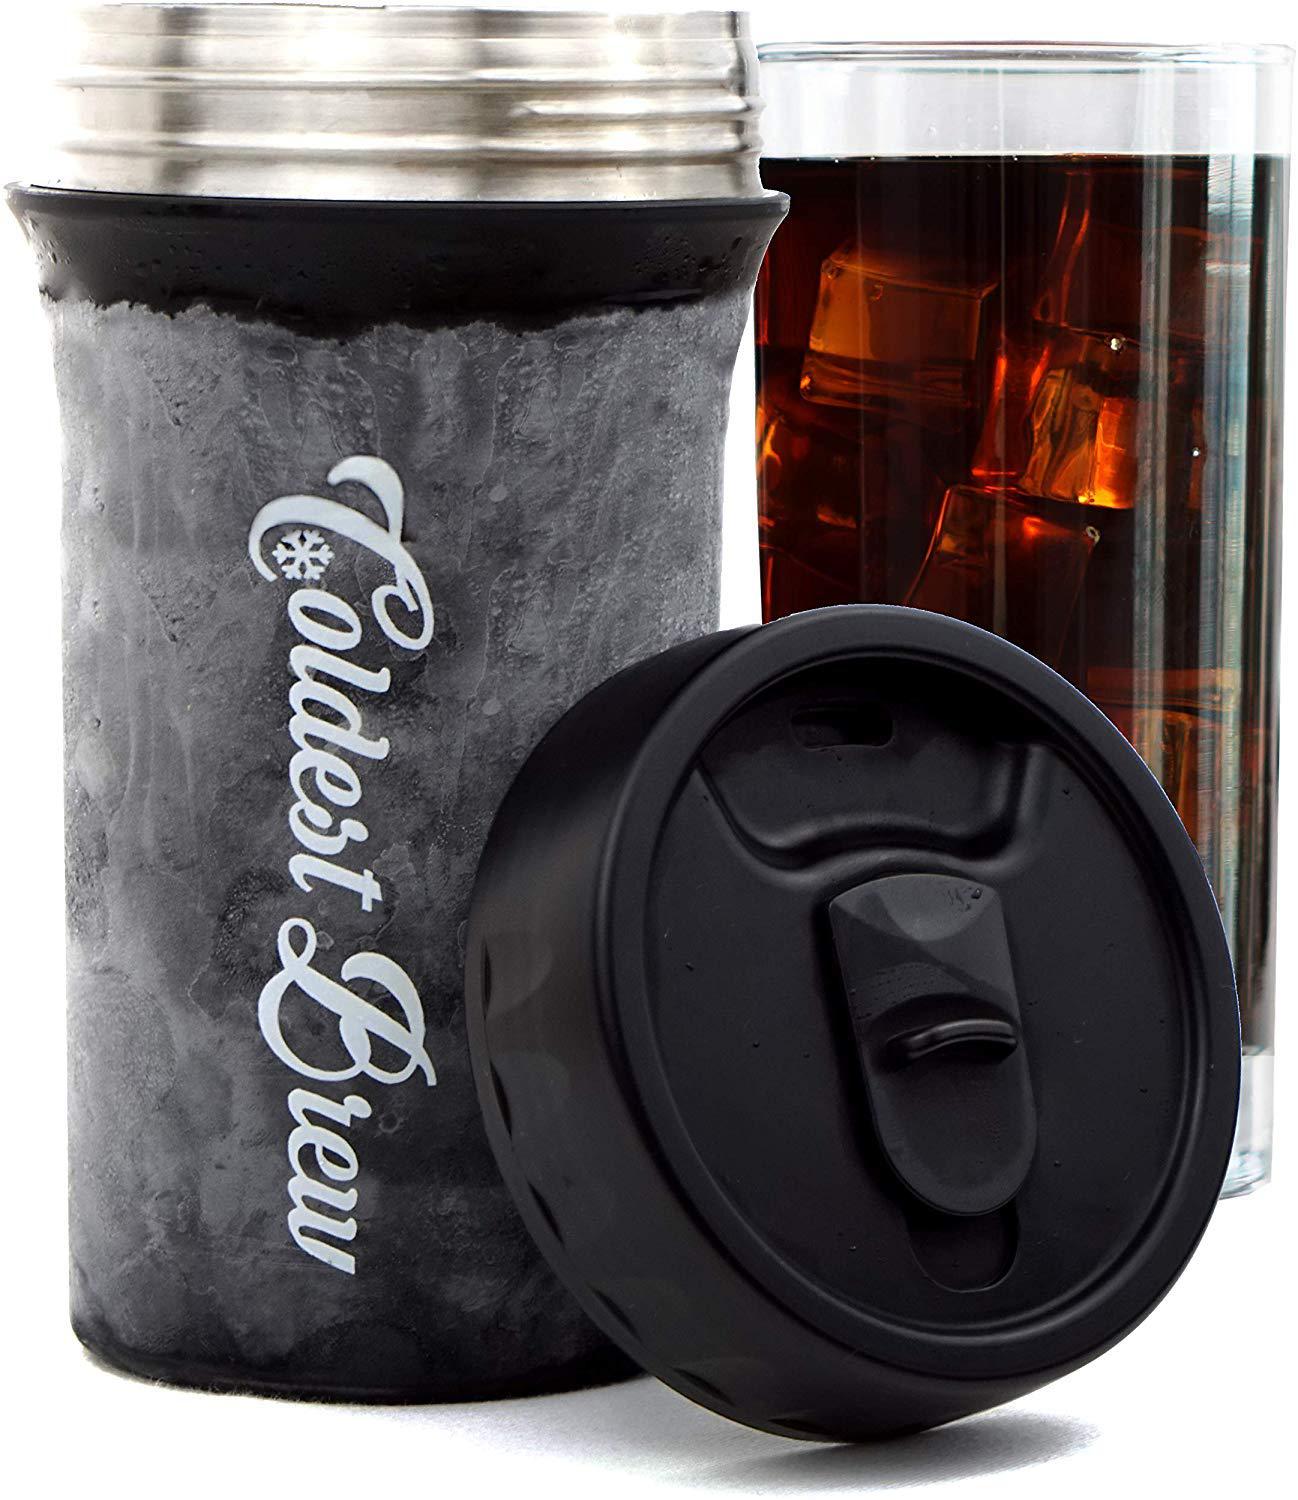 Ateny coldest brew iced coffee maker - make hot coffee into ice coffee in minutes without dilution